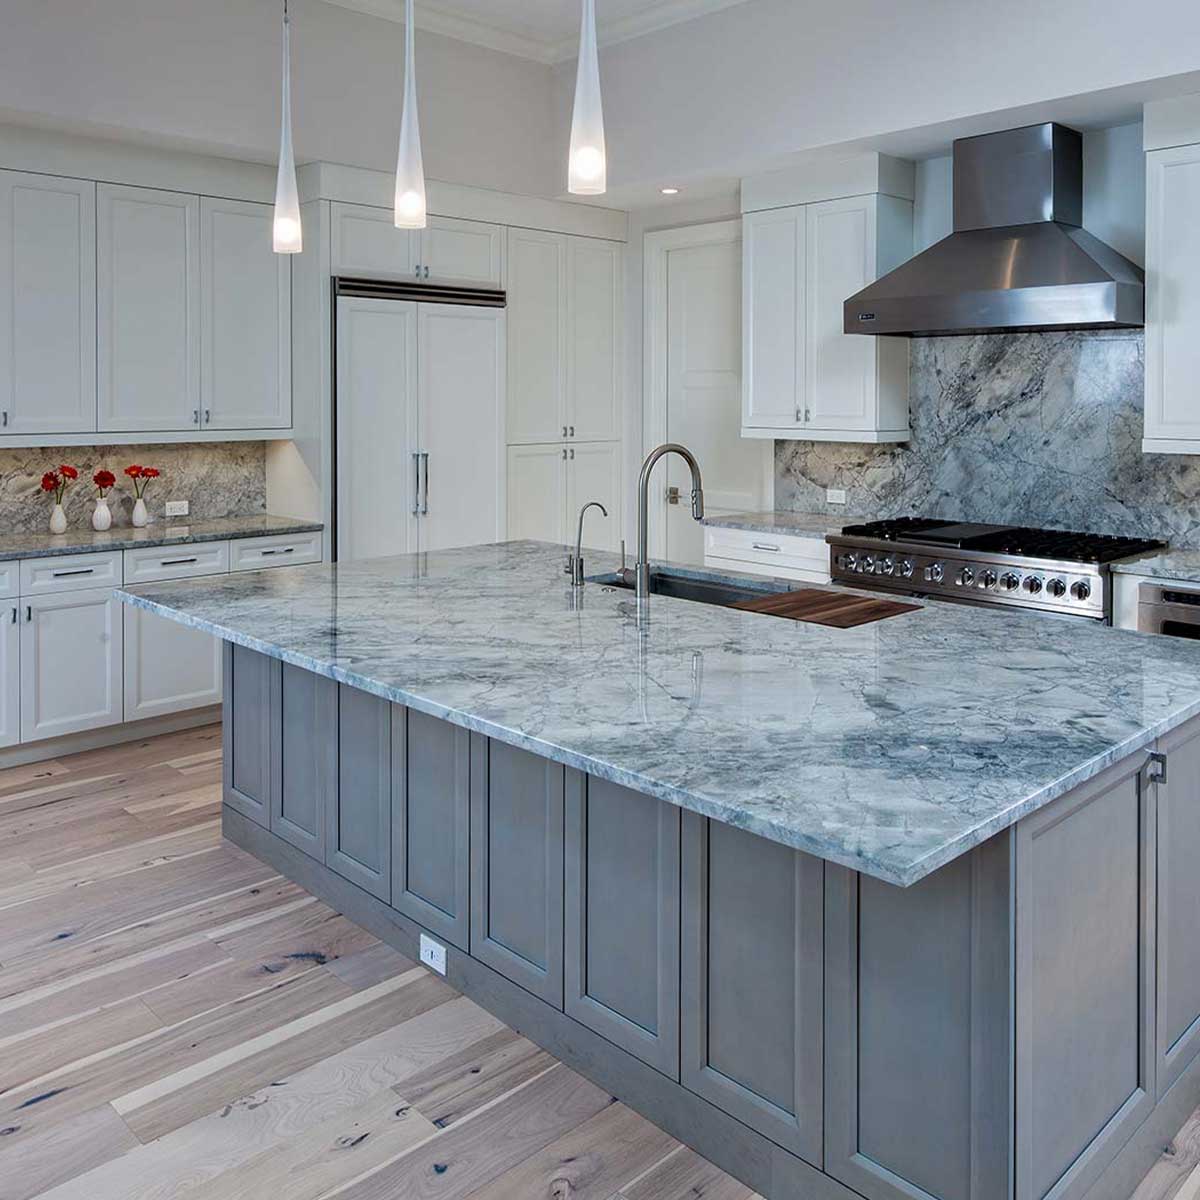 Luxury kitchen remodel with custom cabinetry, granite counter tops and granite backsplash